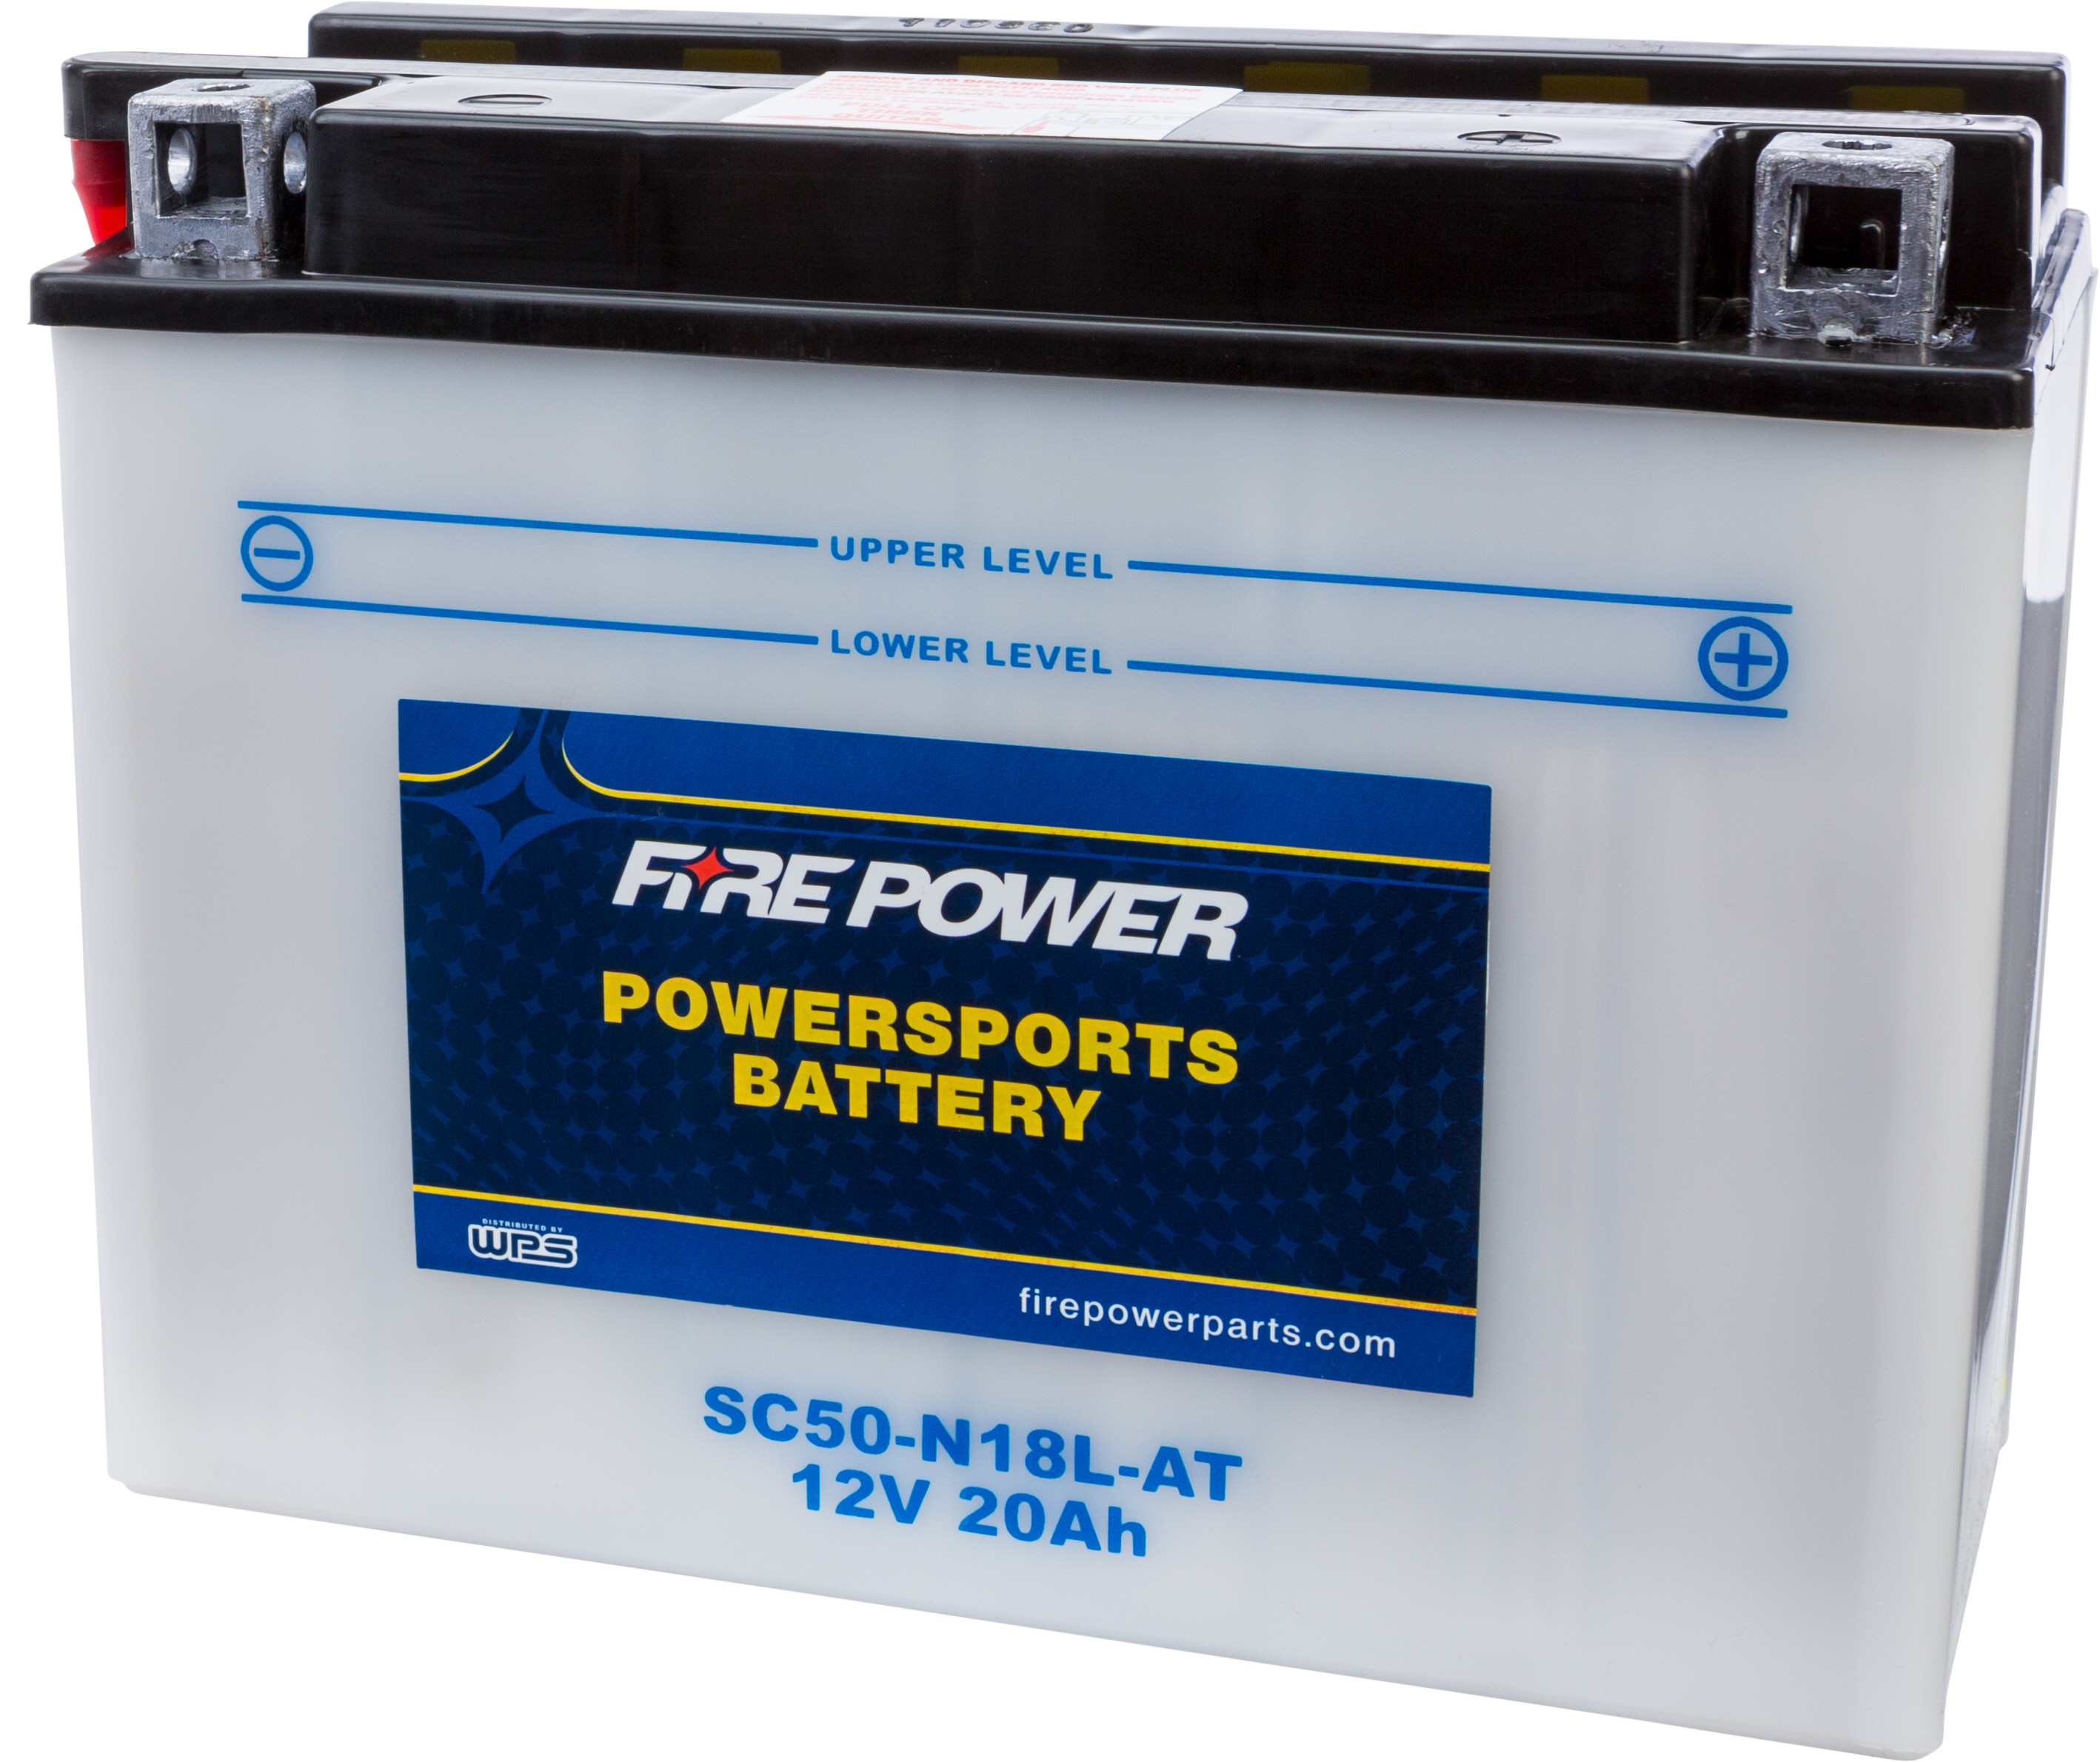 12V Heavy Duty Battery - Replaces SY50-N18L-AT - Click Image to Close